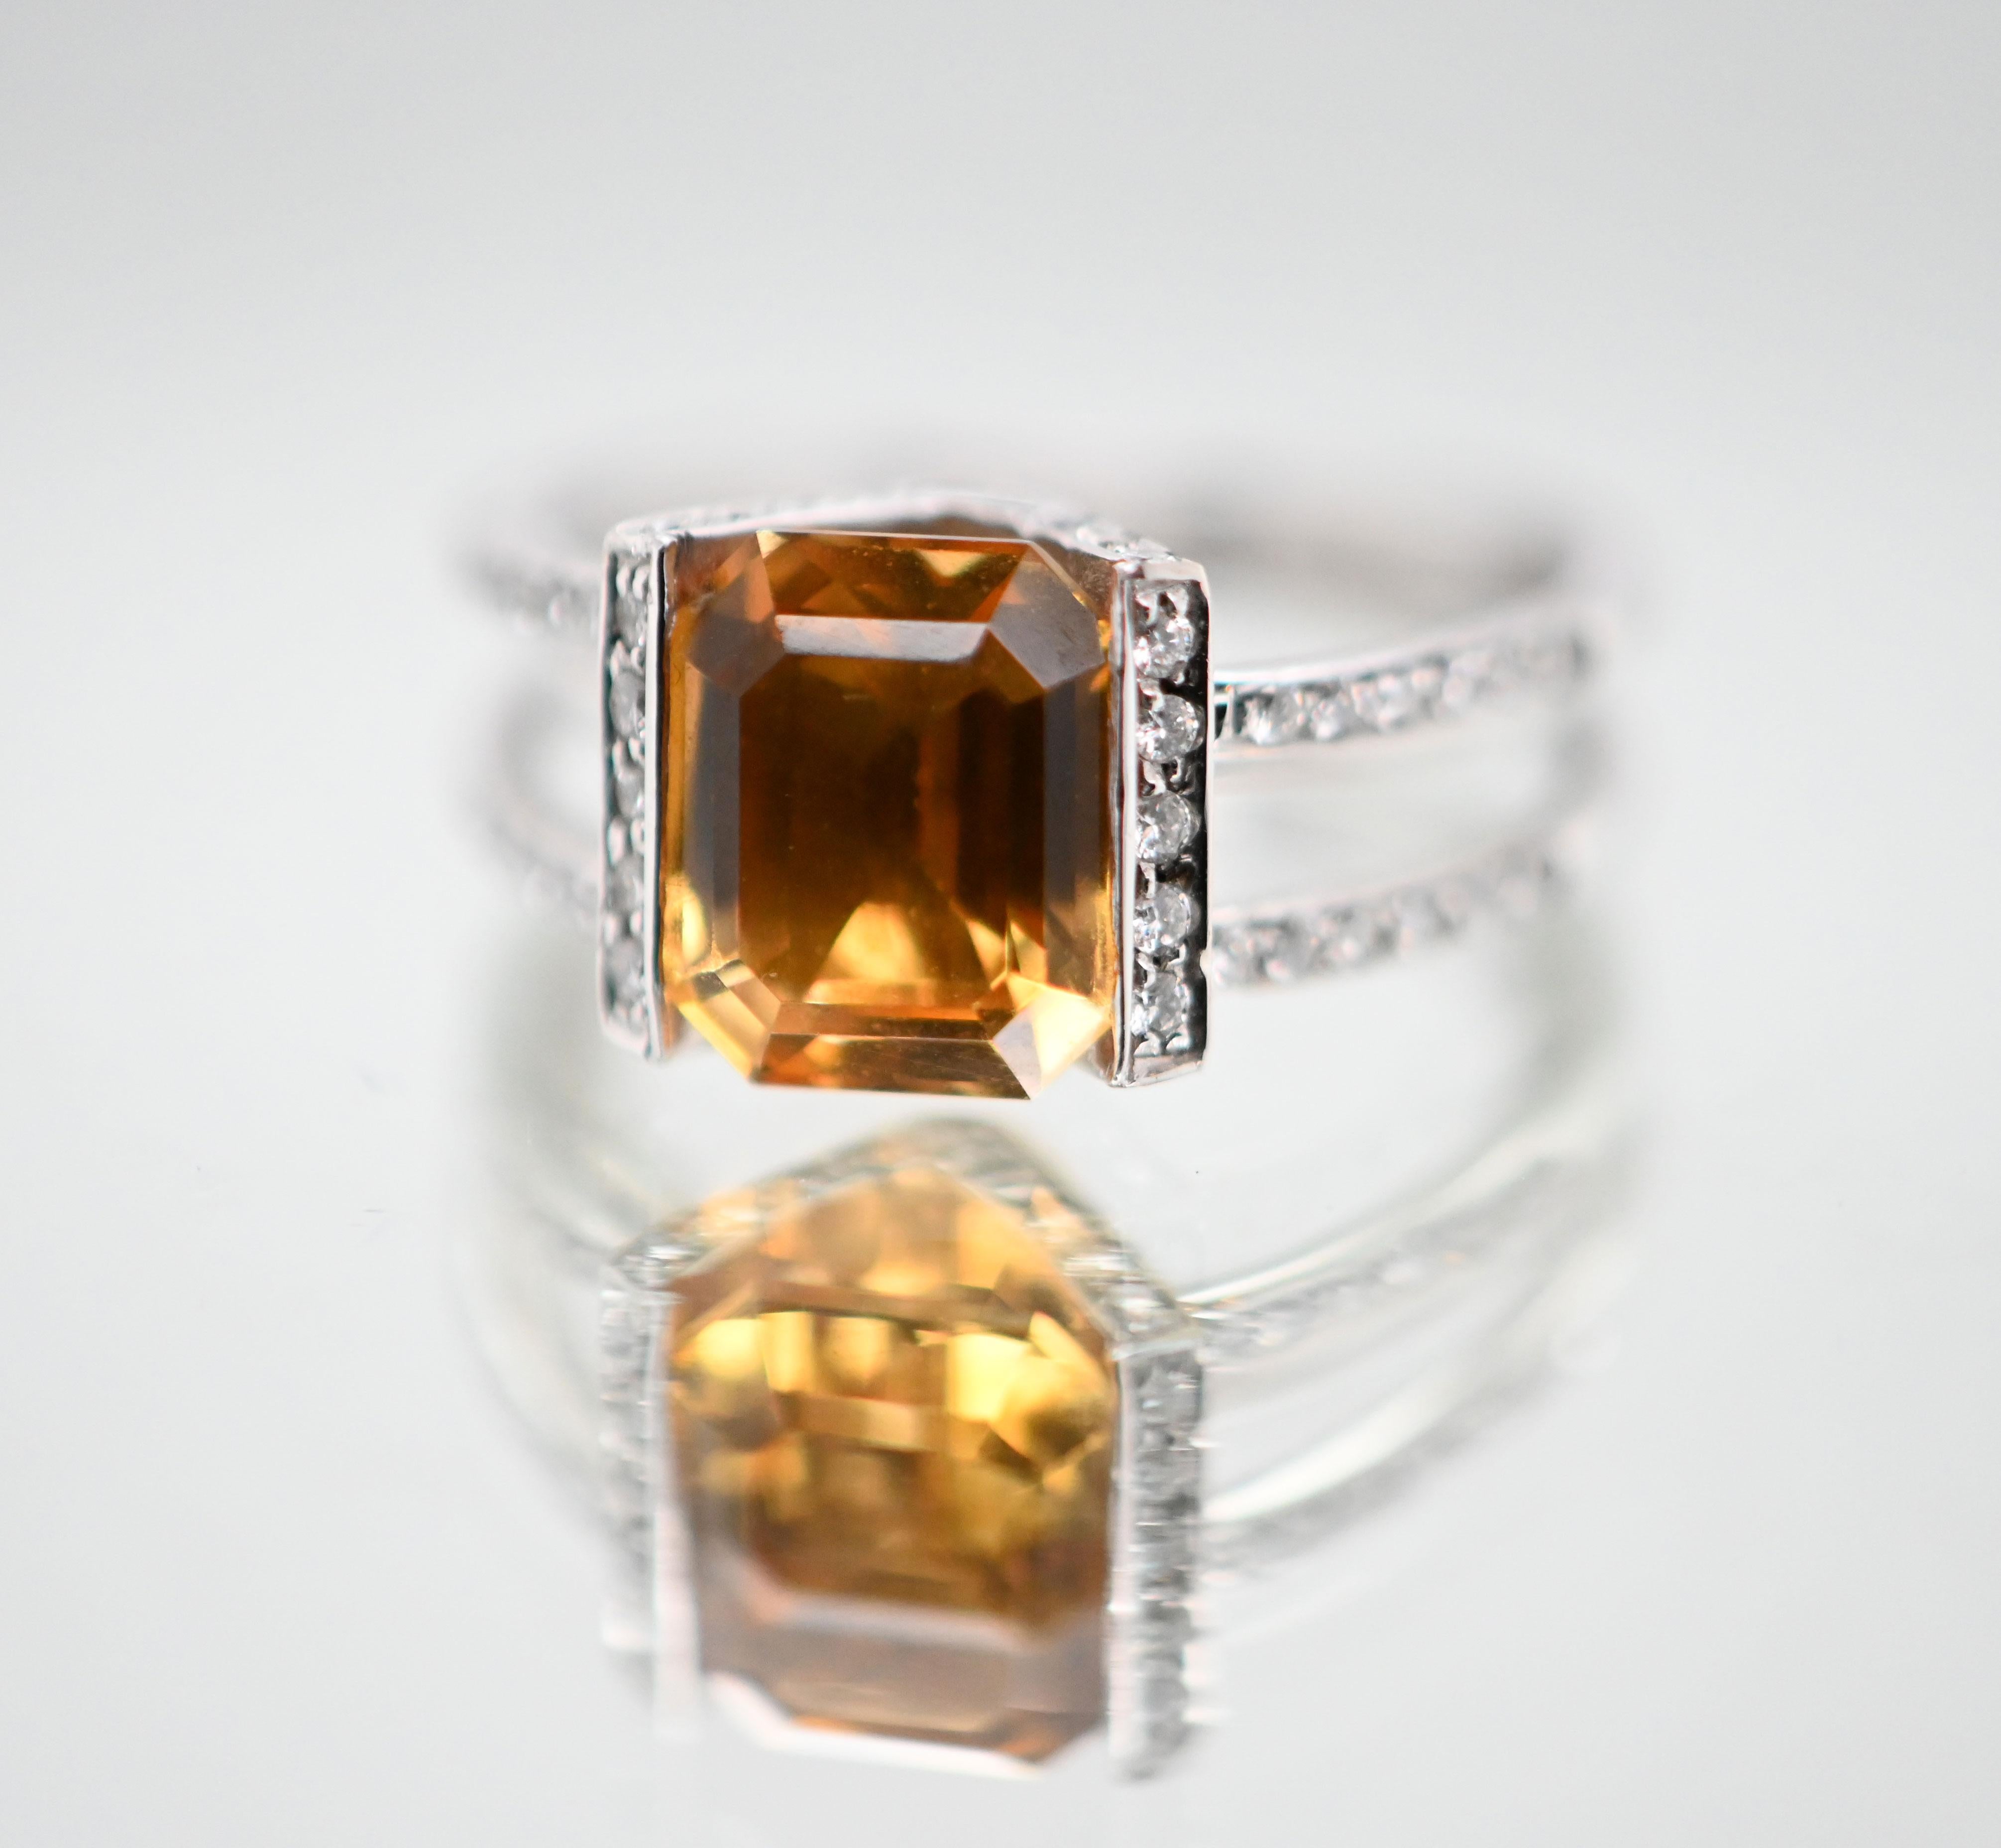 Discover this superb ring in 18-carat white gold, featuring an emerald-shaped citrine surrounded by sparkling diamonds. With its delicate design and meticulous finishing, this ring embodies elegance and sophistication.

The center of this ring